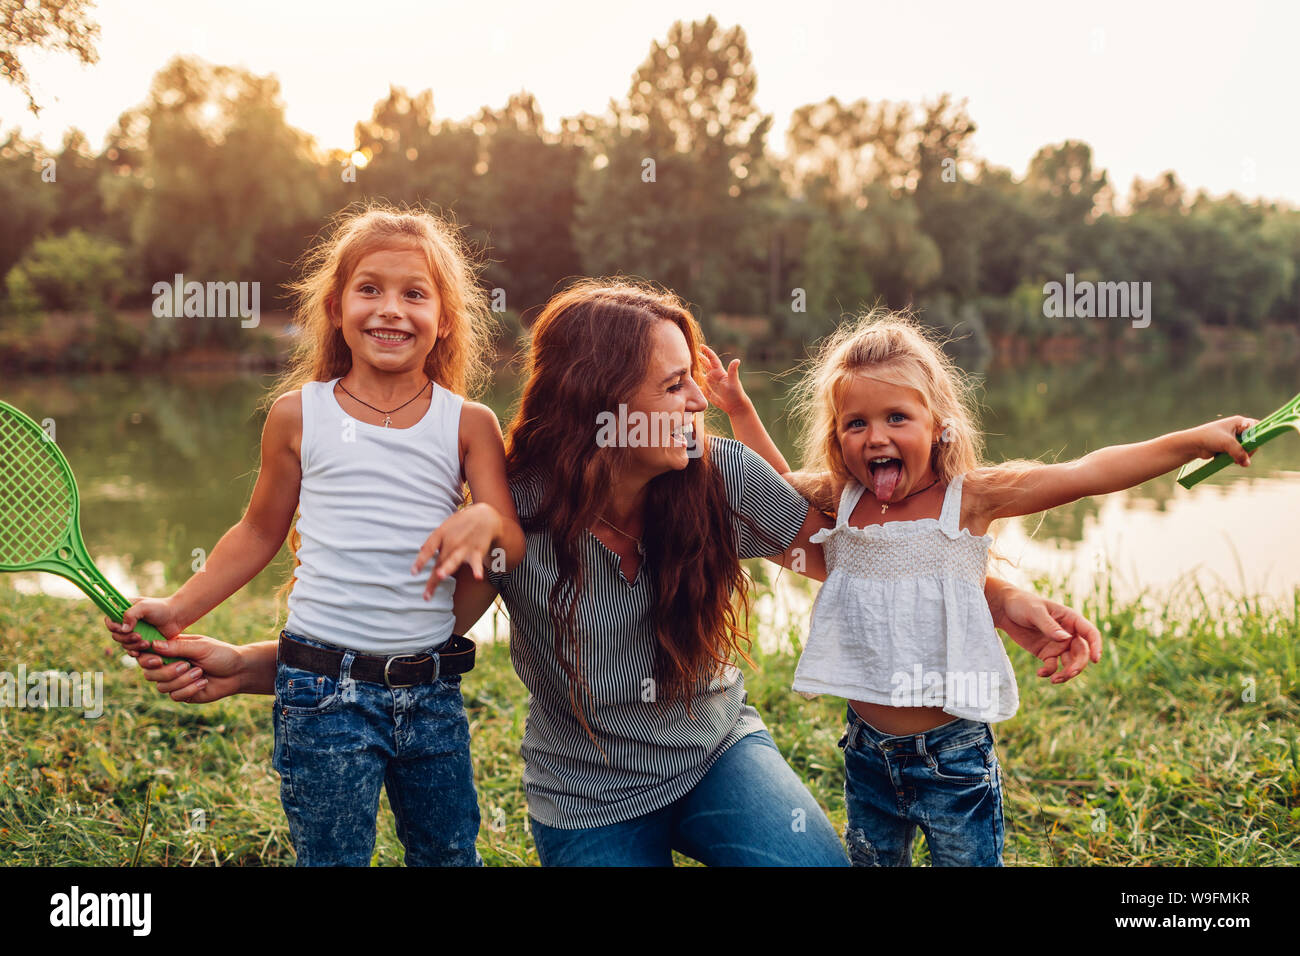 Family having fun after playing badminton by summer river at sunset. Mother laughing and grimacing with daughters outdoors. International Childrens Da Stock Photo